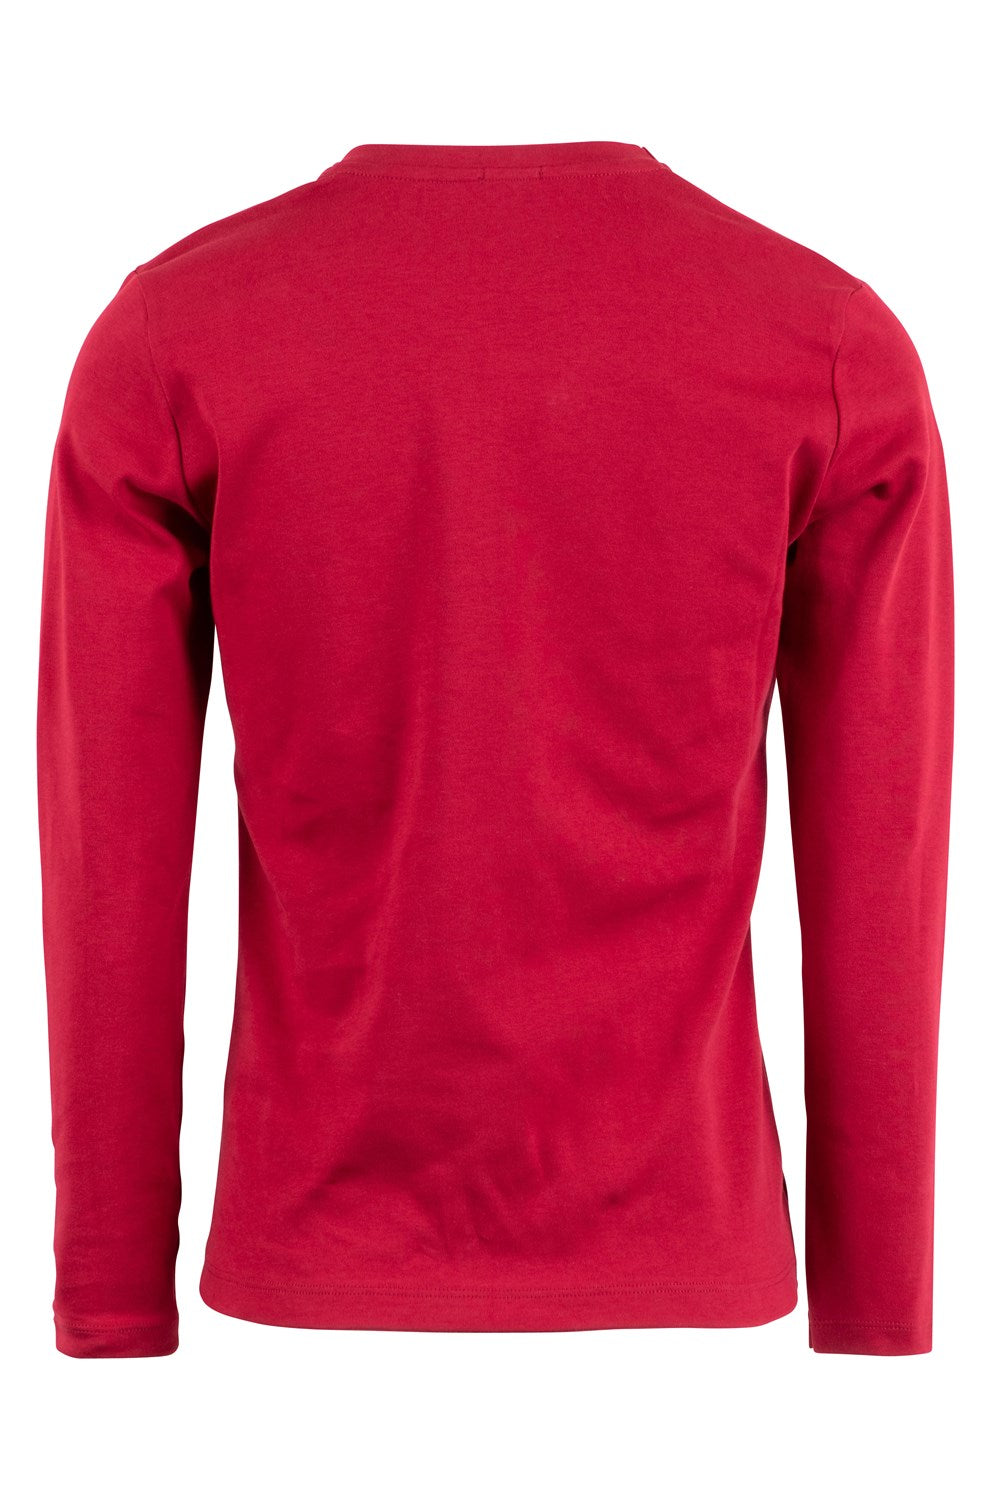 Montar Shirley Sequin Logo Shirt Ruby Red